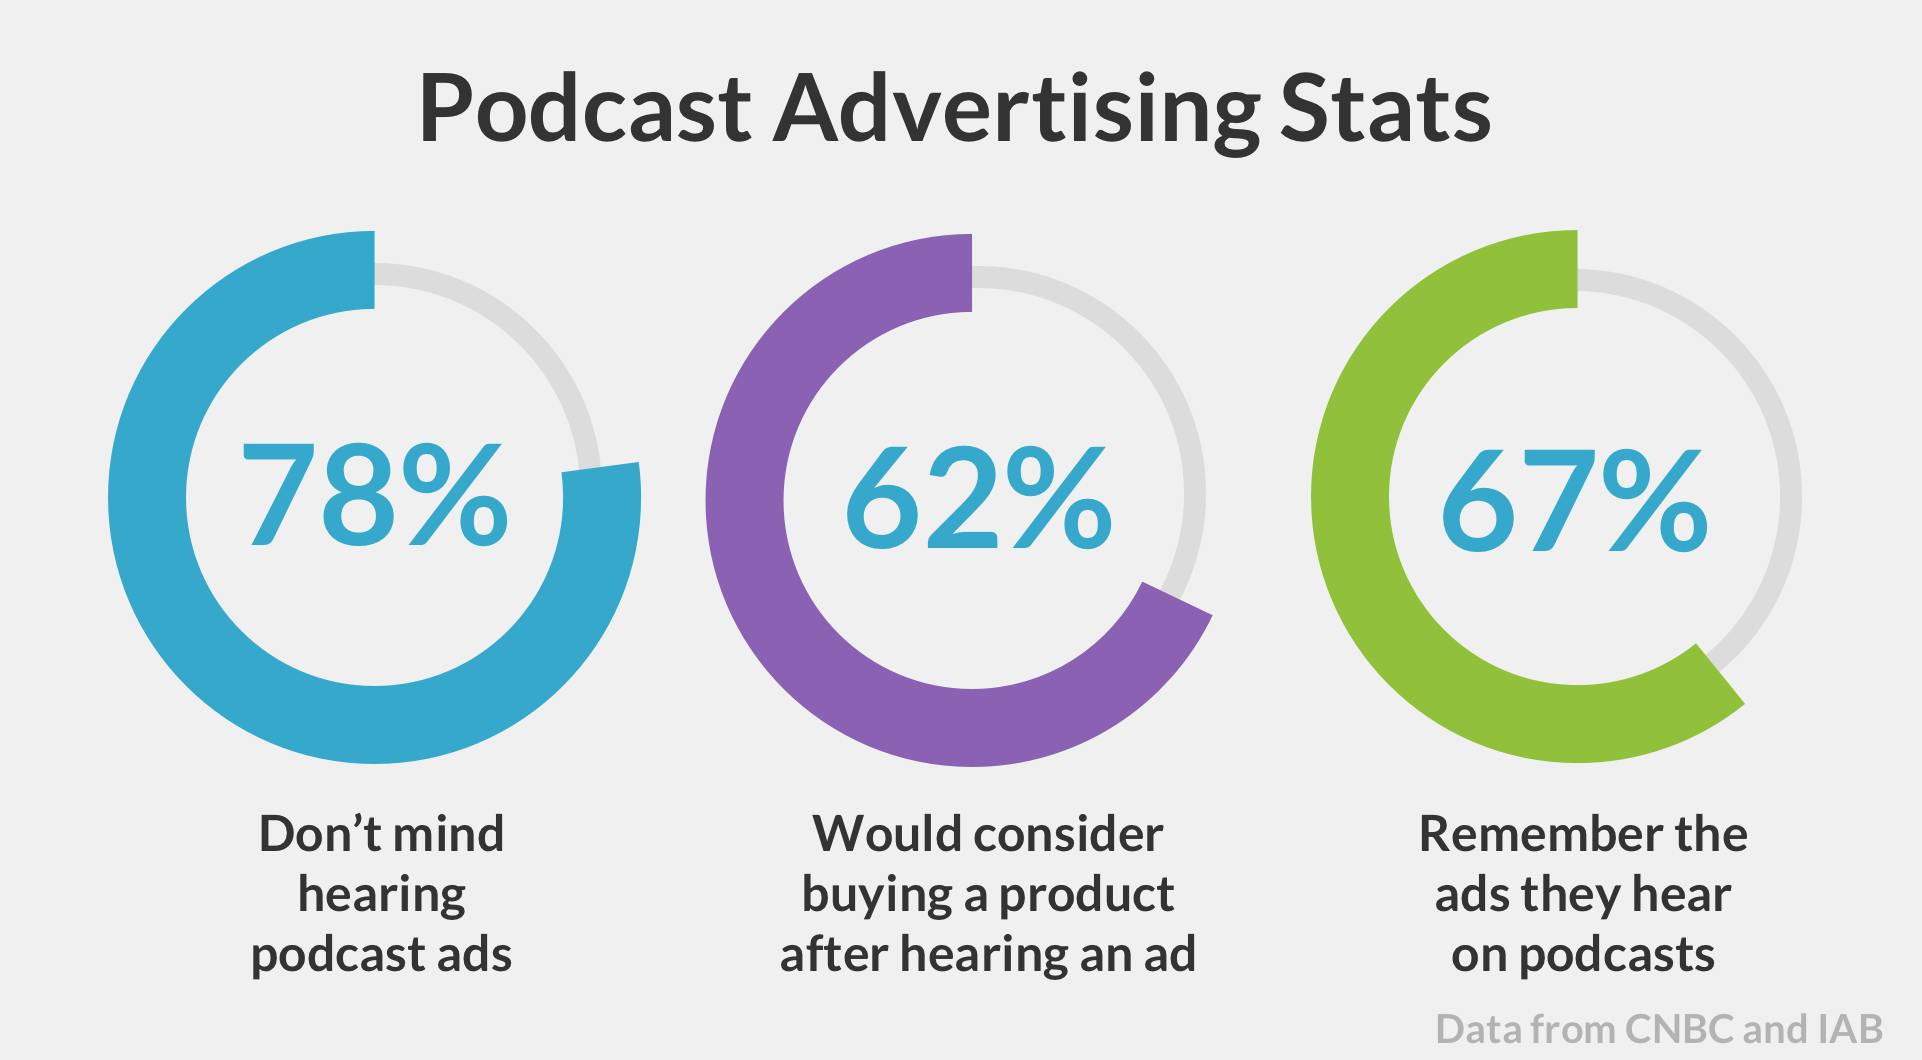 Three circles showing podcast advertising statistics and percentages 